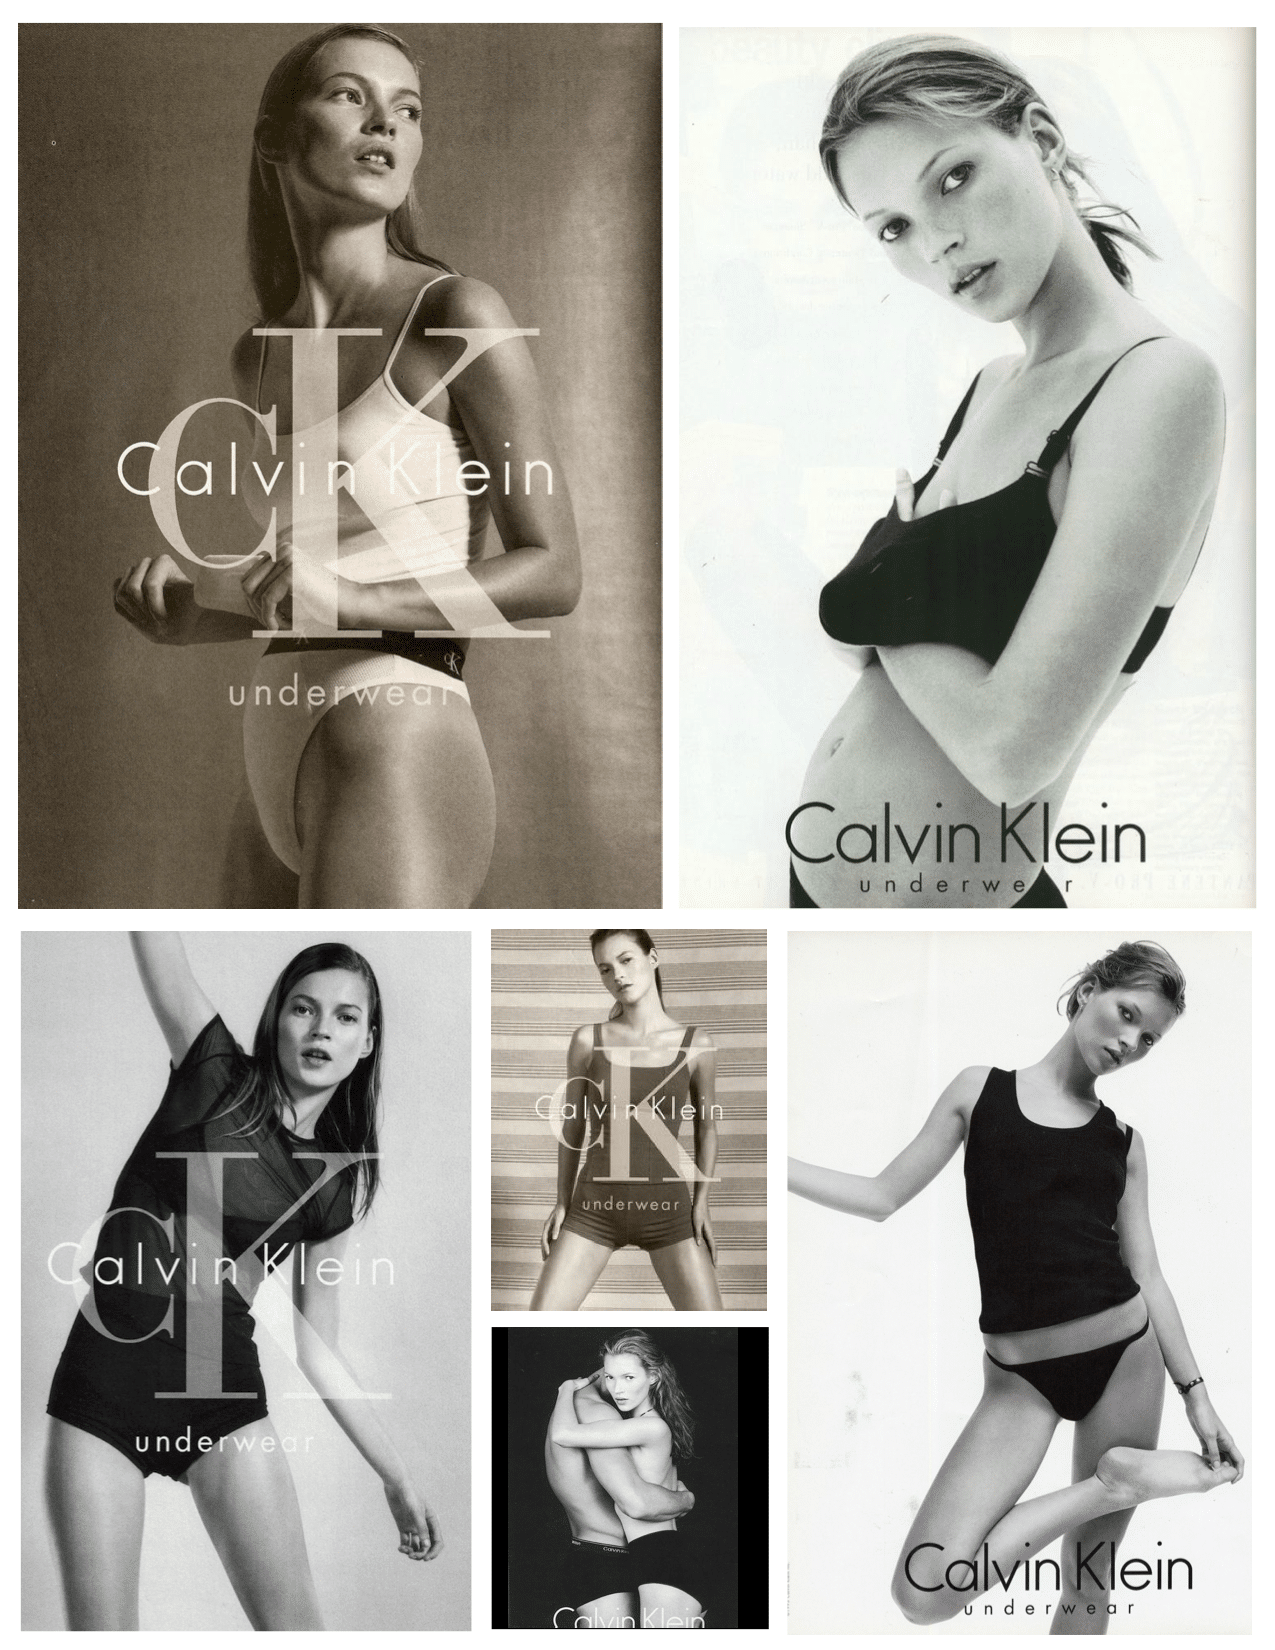 The Impact of Kate Moss on Calvin Klein beauty campaigns​